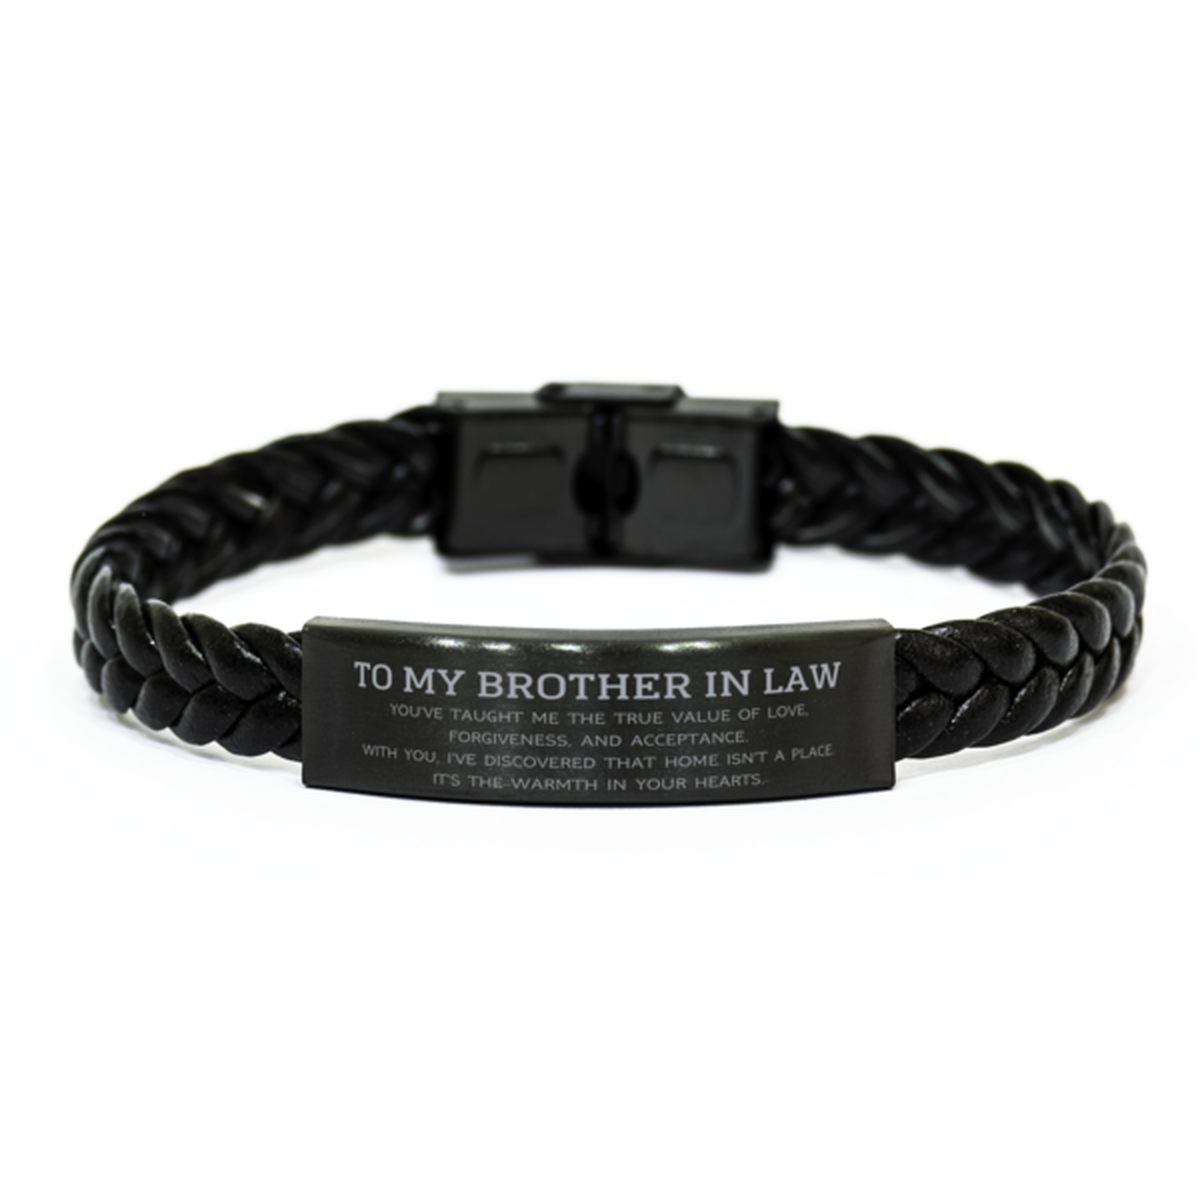 To My Brother In Law Gifts, You've taught me the true value of love, Thank You Gifts For Brother In Law, Birthday Braided Leather Bracelet For Brother In Law